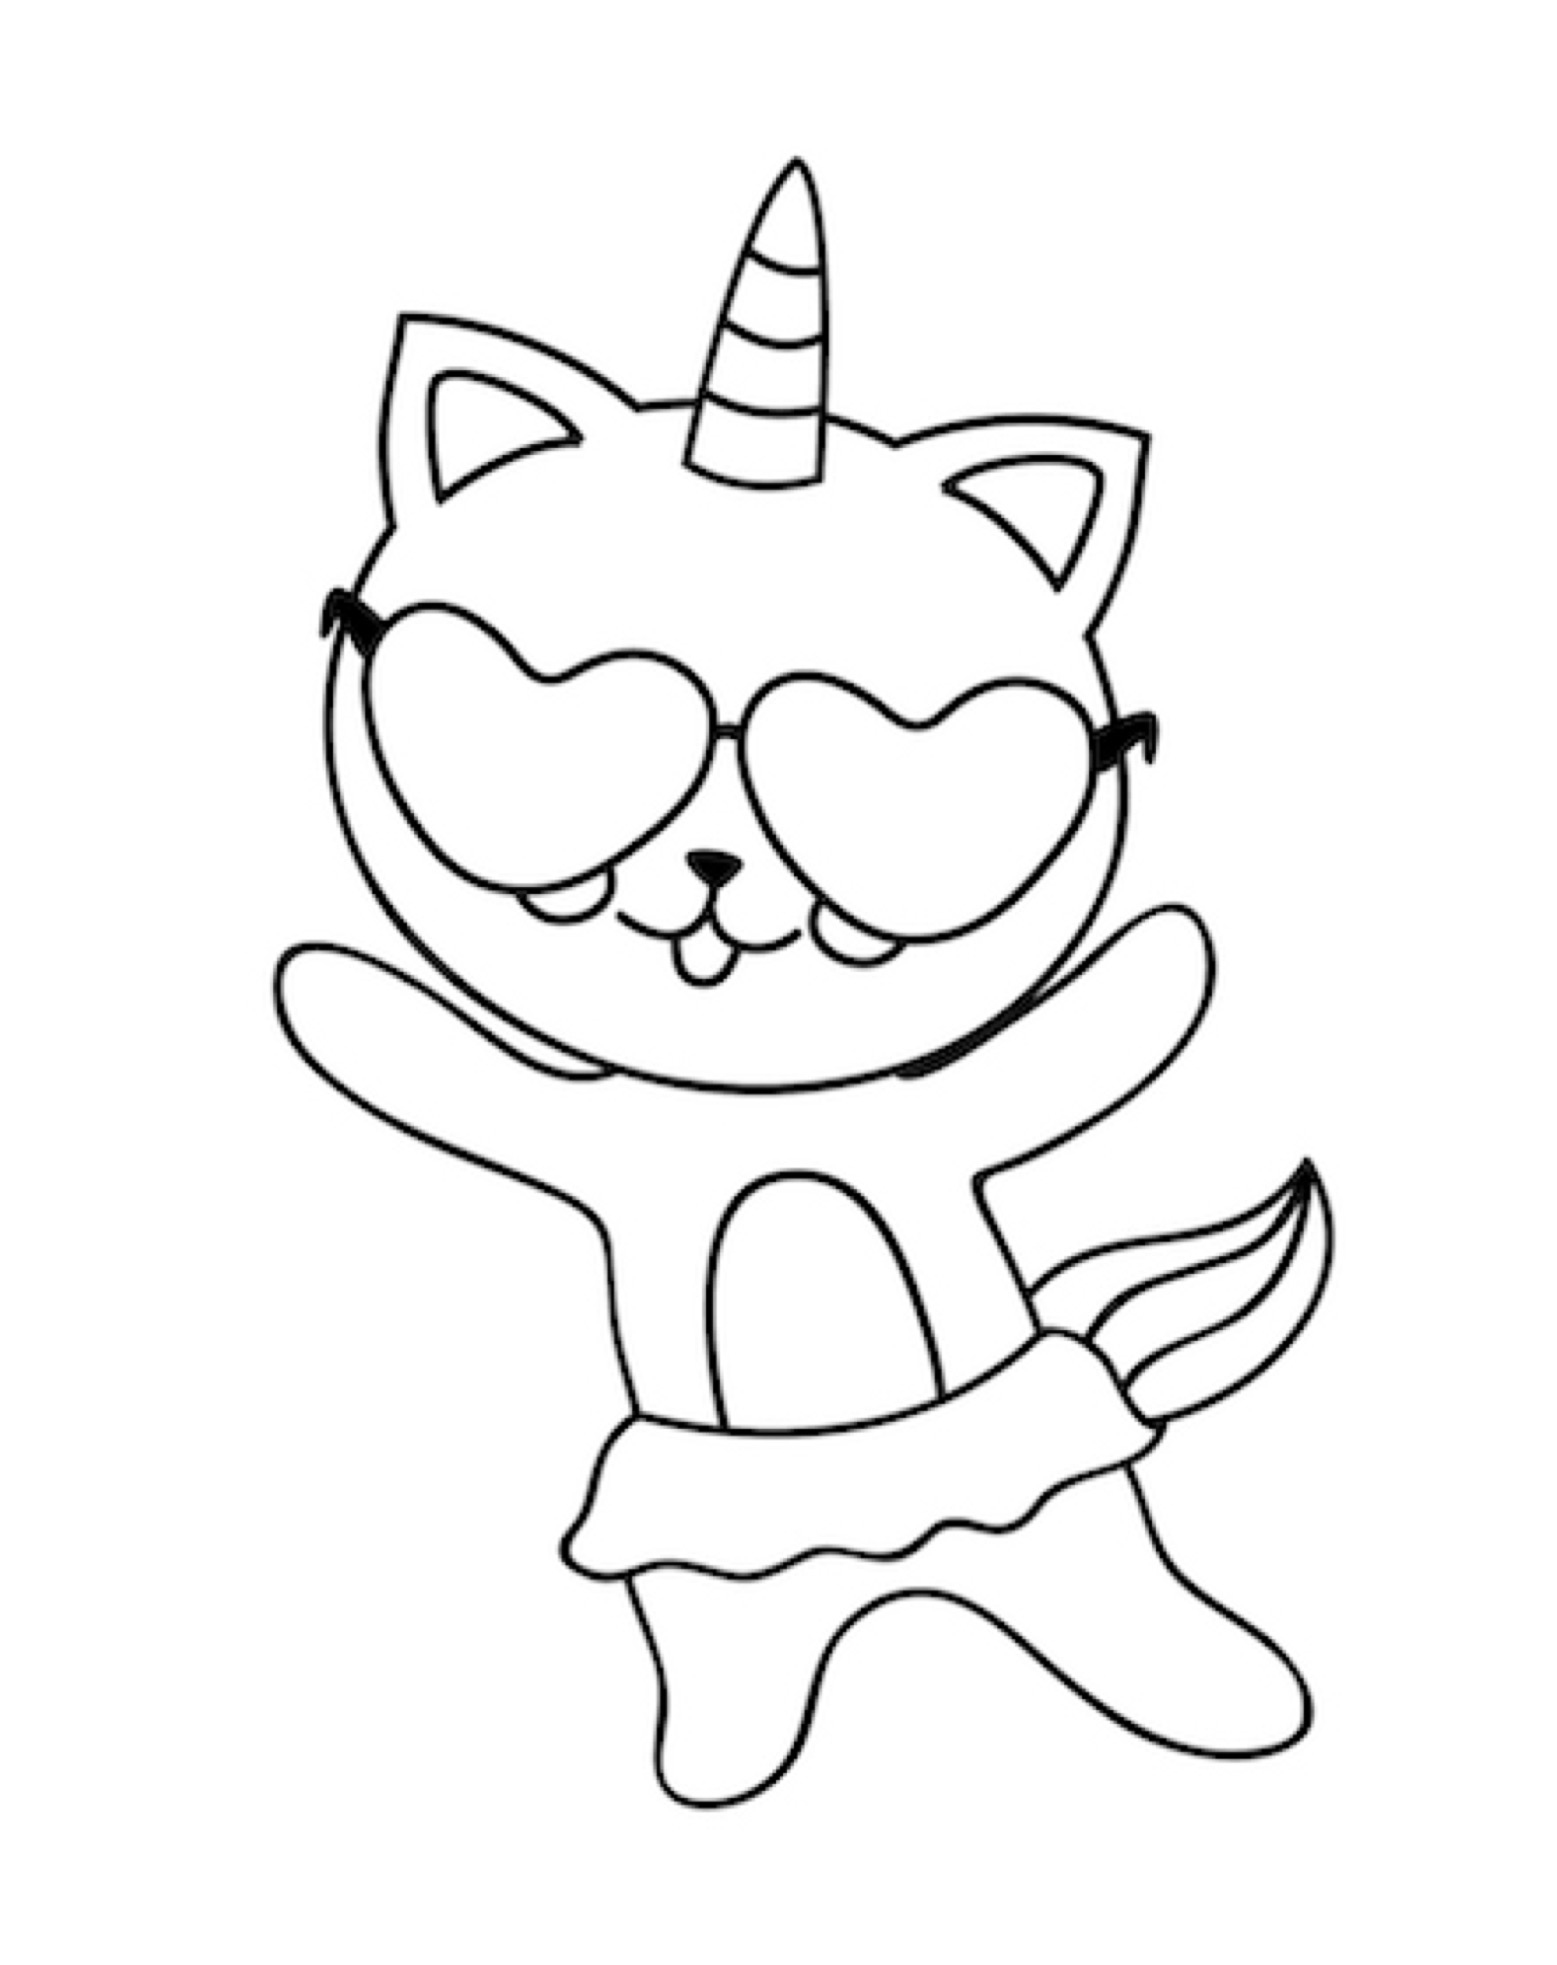 Unicorn Cat Coloring Pages To Print